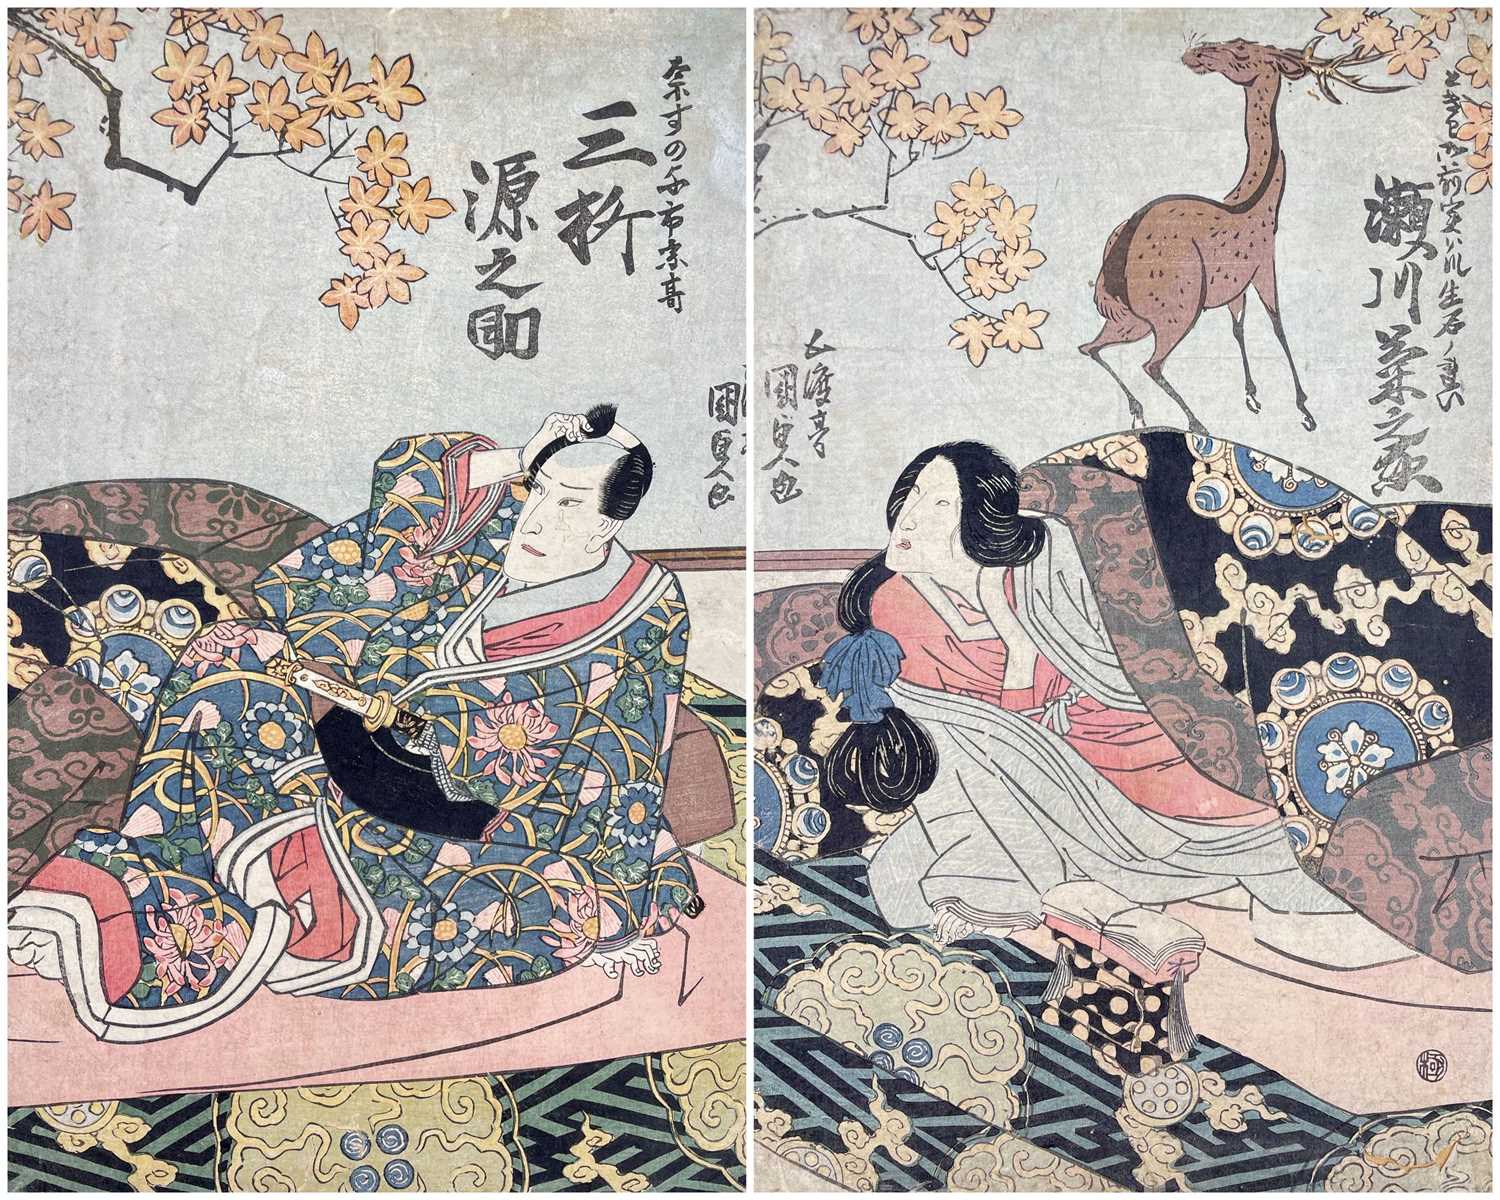 UTAGAWA KUNISADA, Nobleman and courtesan in bed, onan tat-e diptych, Comments: margins slightly